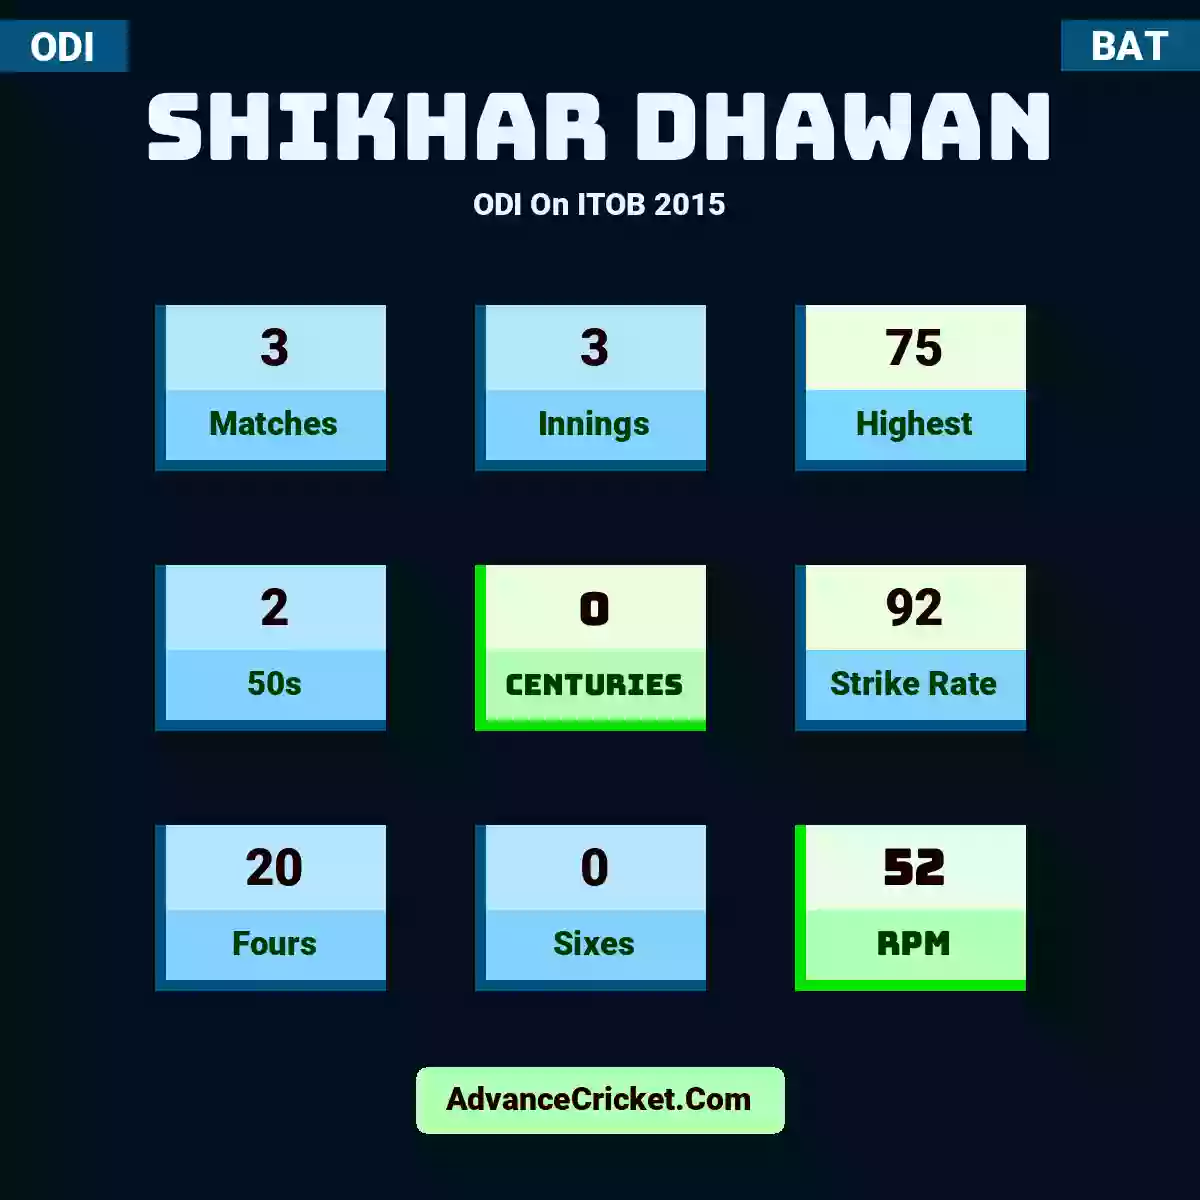 Shikhar Dhawan ODI  On ITOB 2015, Shikhar Dhawan played 3 matches, scored 75 runs as highest, 2 half-centuries, and 0 centuries, with a strike rate of 92. S.Dhawan hit 20 fours and 0 sixes, with an RPM of 52.